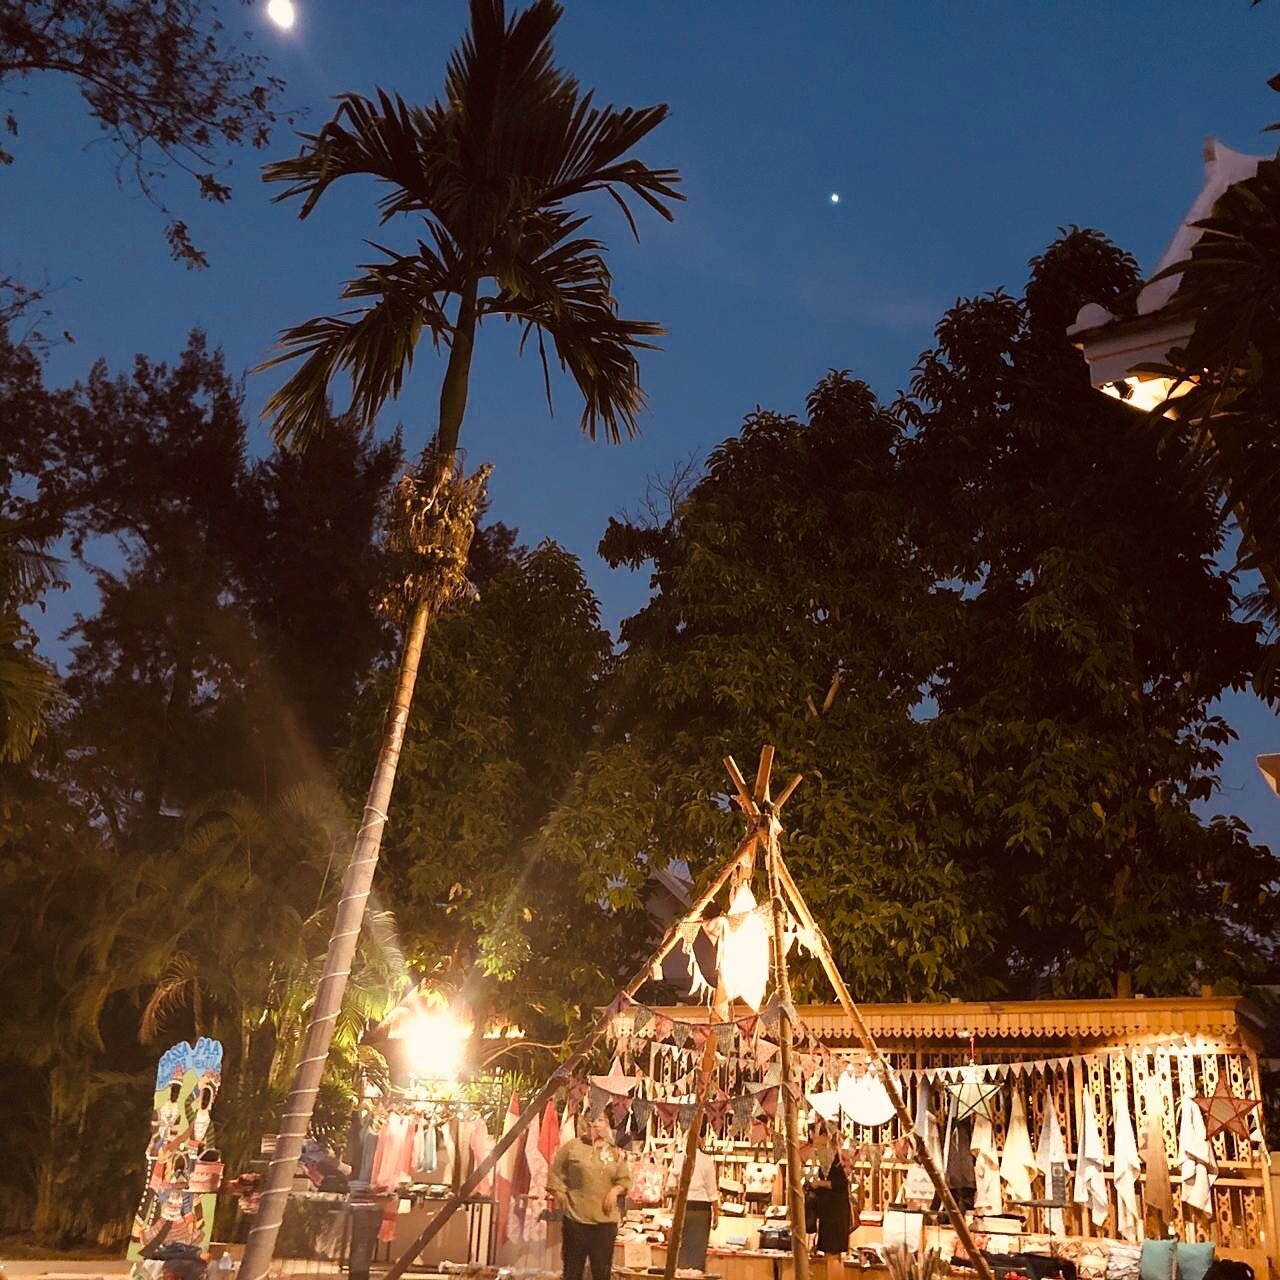 For those of you in or heading to Luang Prabang, come join us under the bright night stars. We&rsquo;ve set up camp at the beautiful @avaniluangprabang hotel grounds where everyday you can come meet our makers and learn about the Hmong crafts that go